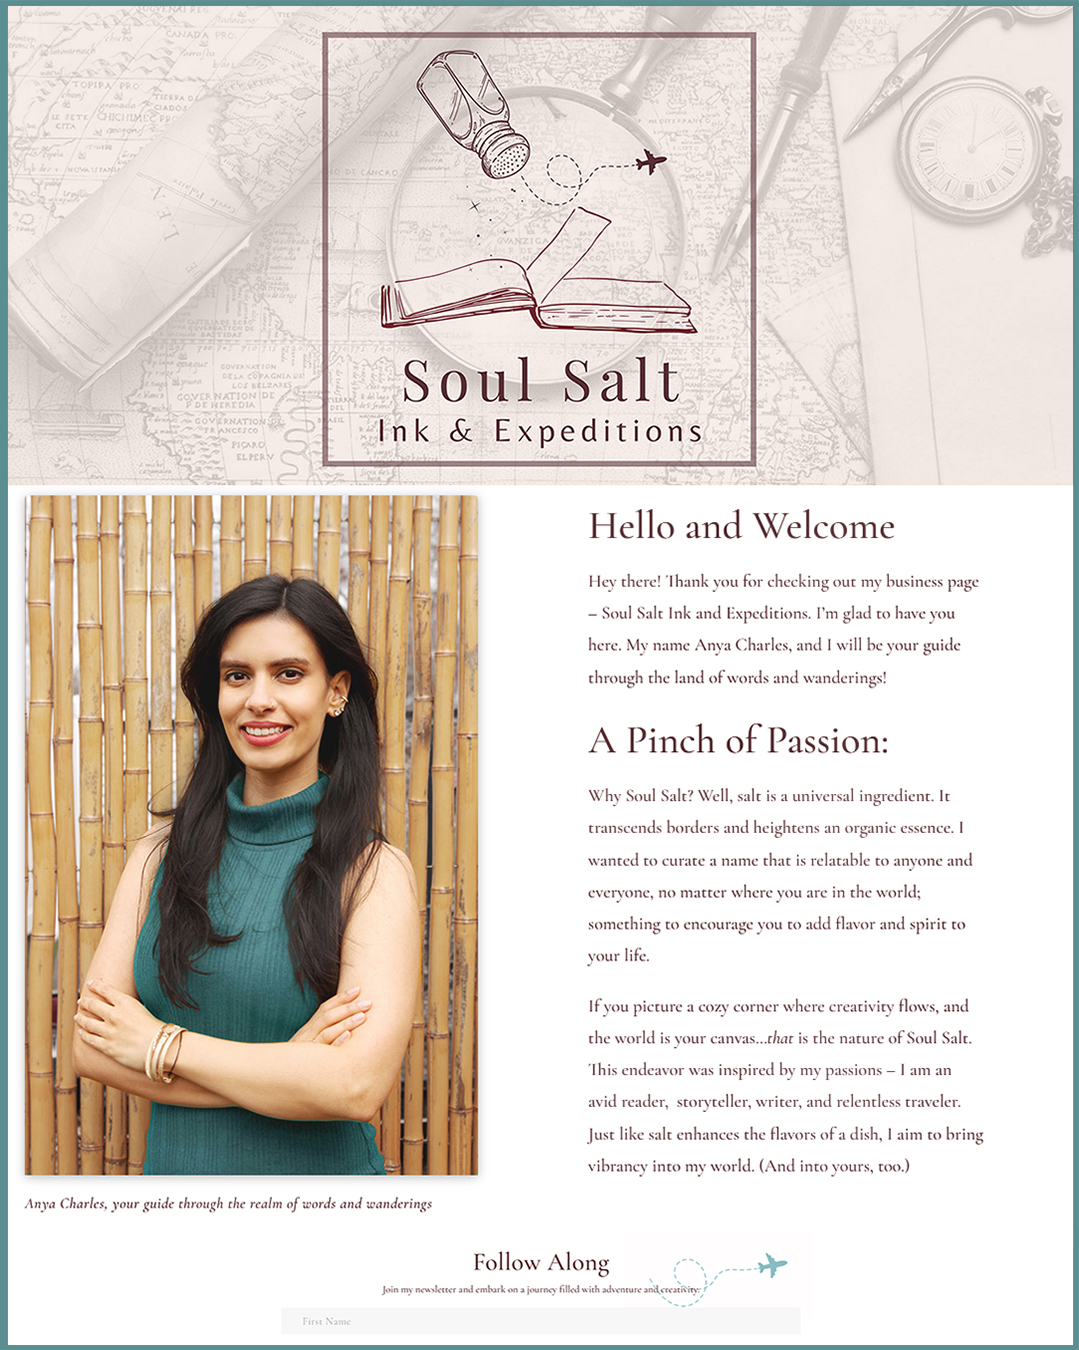 Check out Anya's new business website – Soul Salt Ink and Expeditions